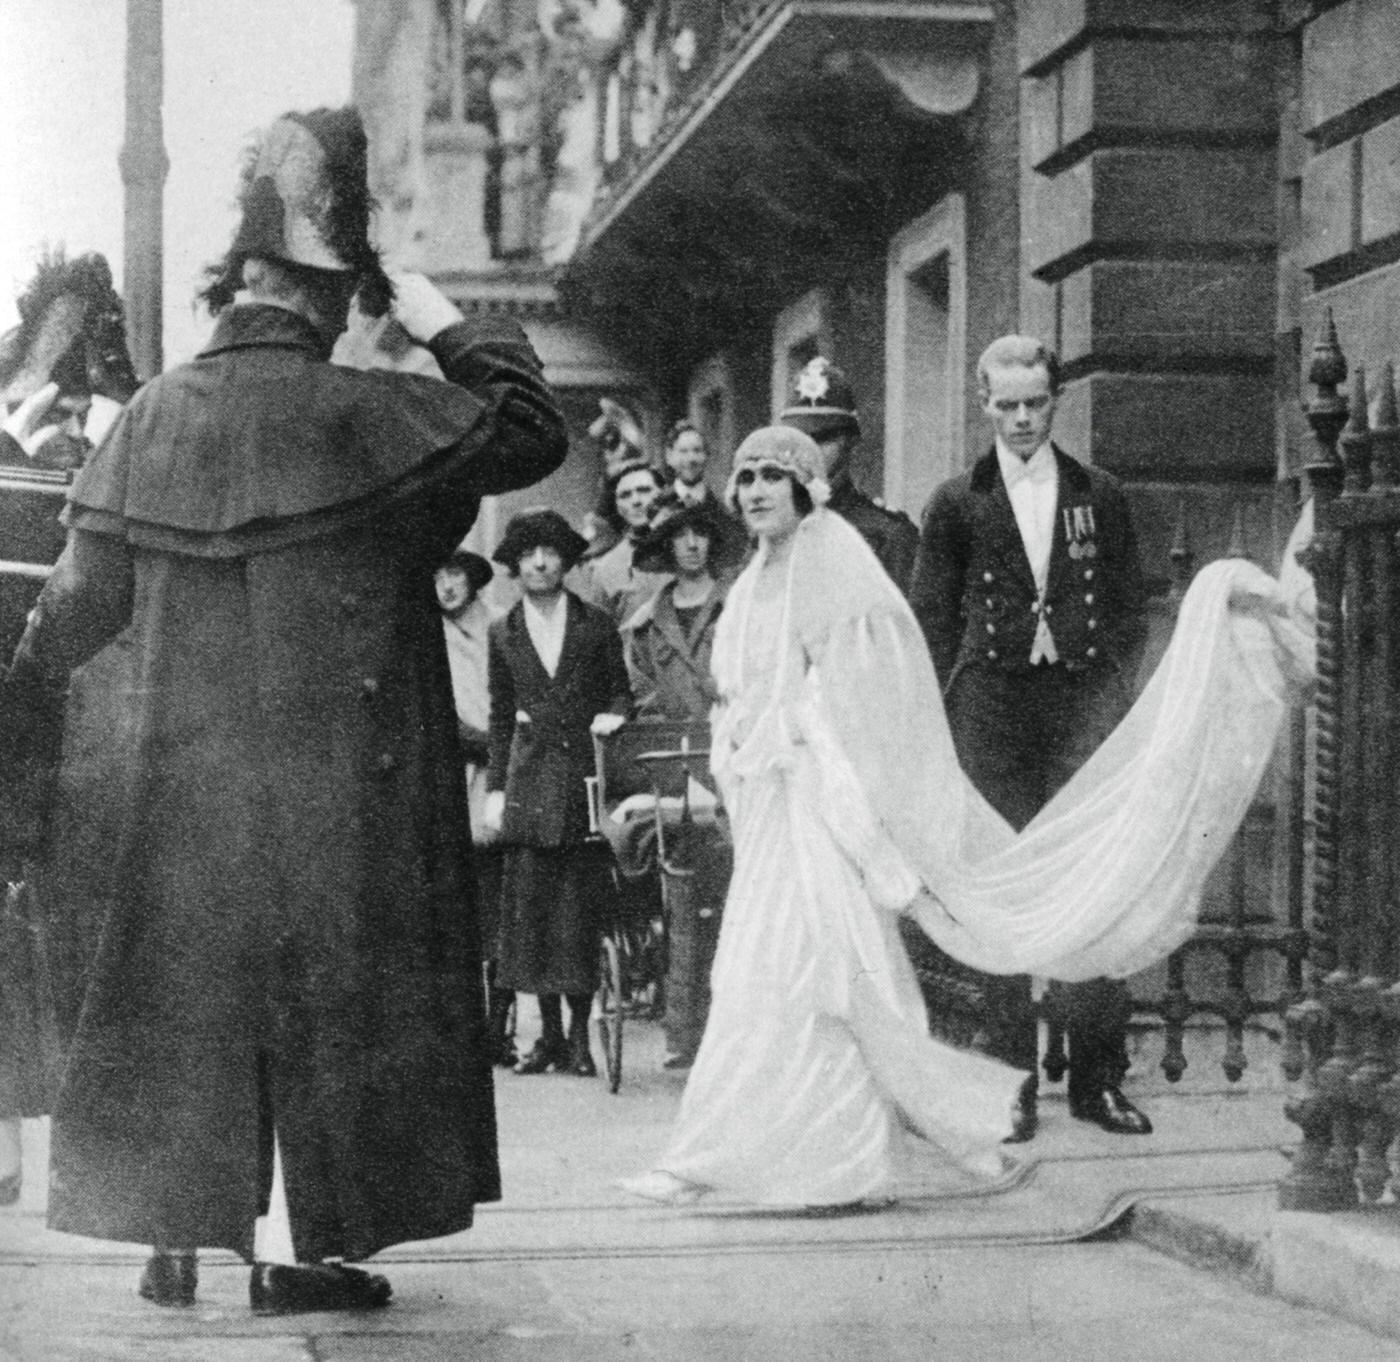 Lady Elizabeth Bowes-Lyon on her way to be married at Westminster Abbey, 26 April 1923